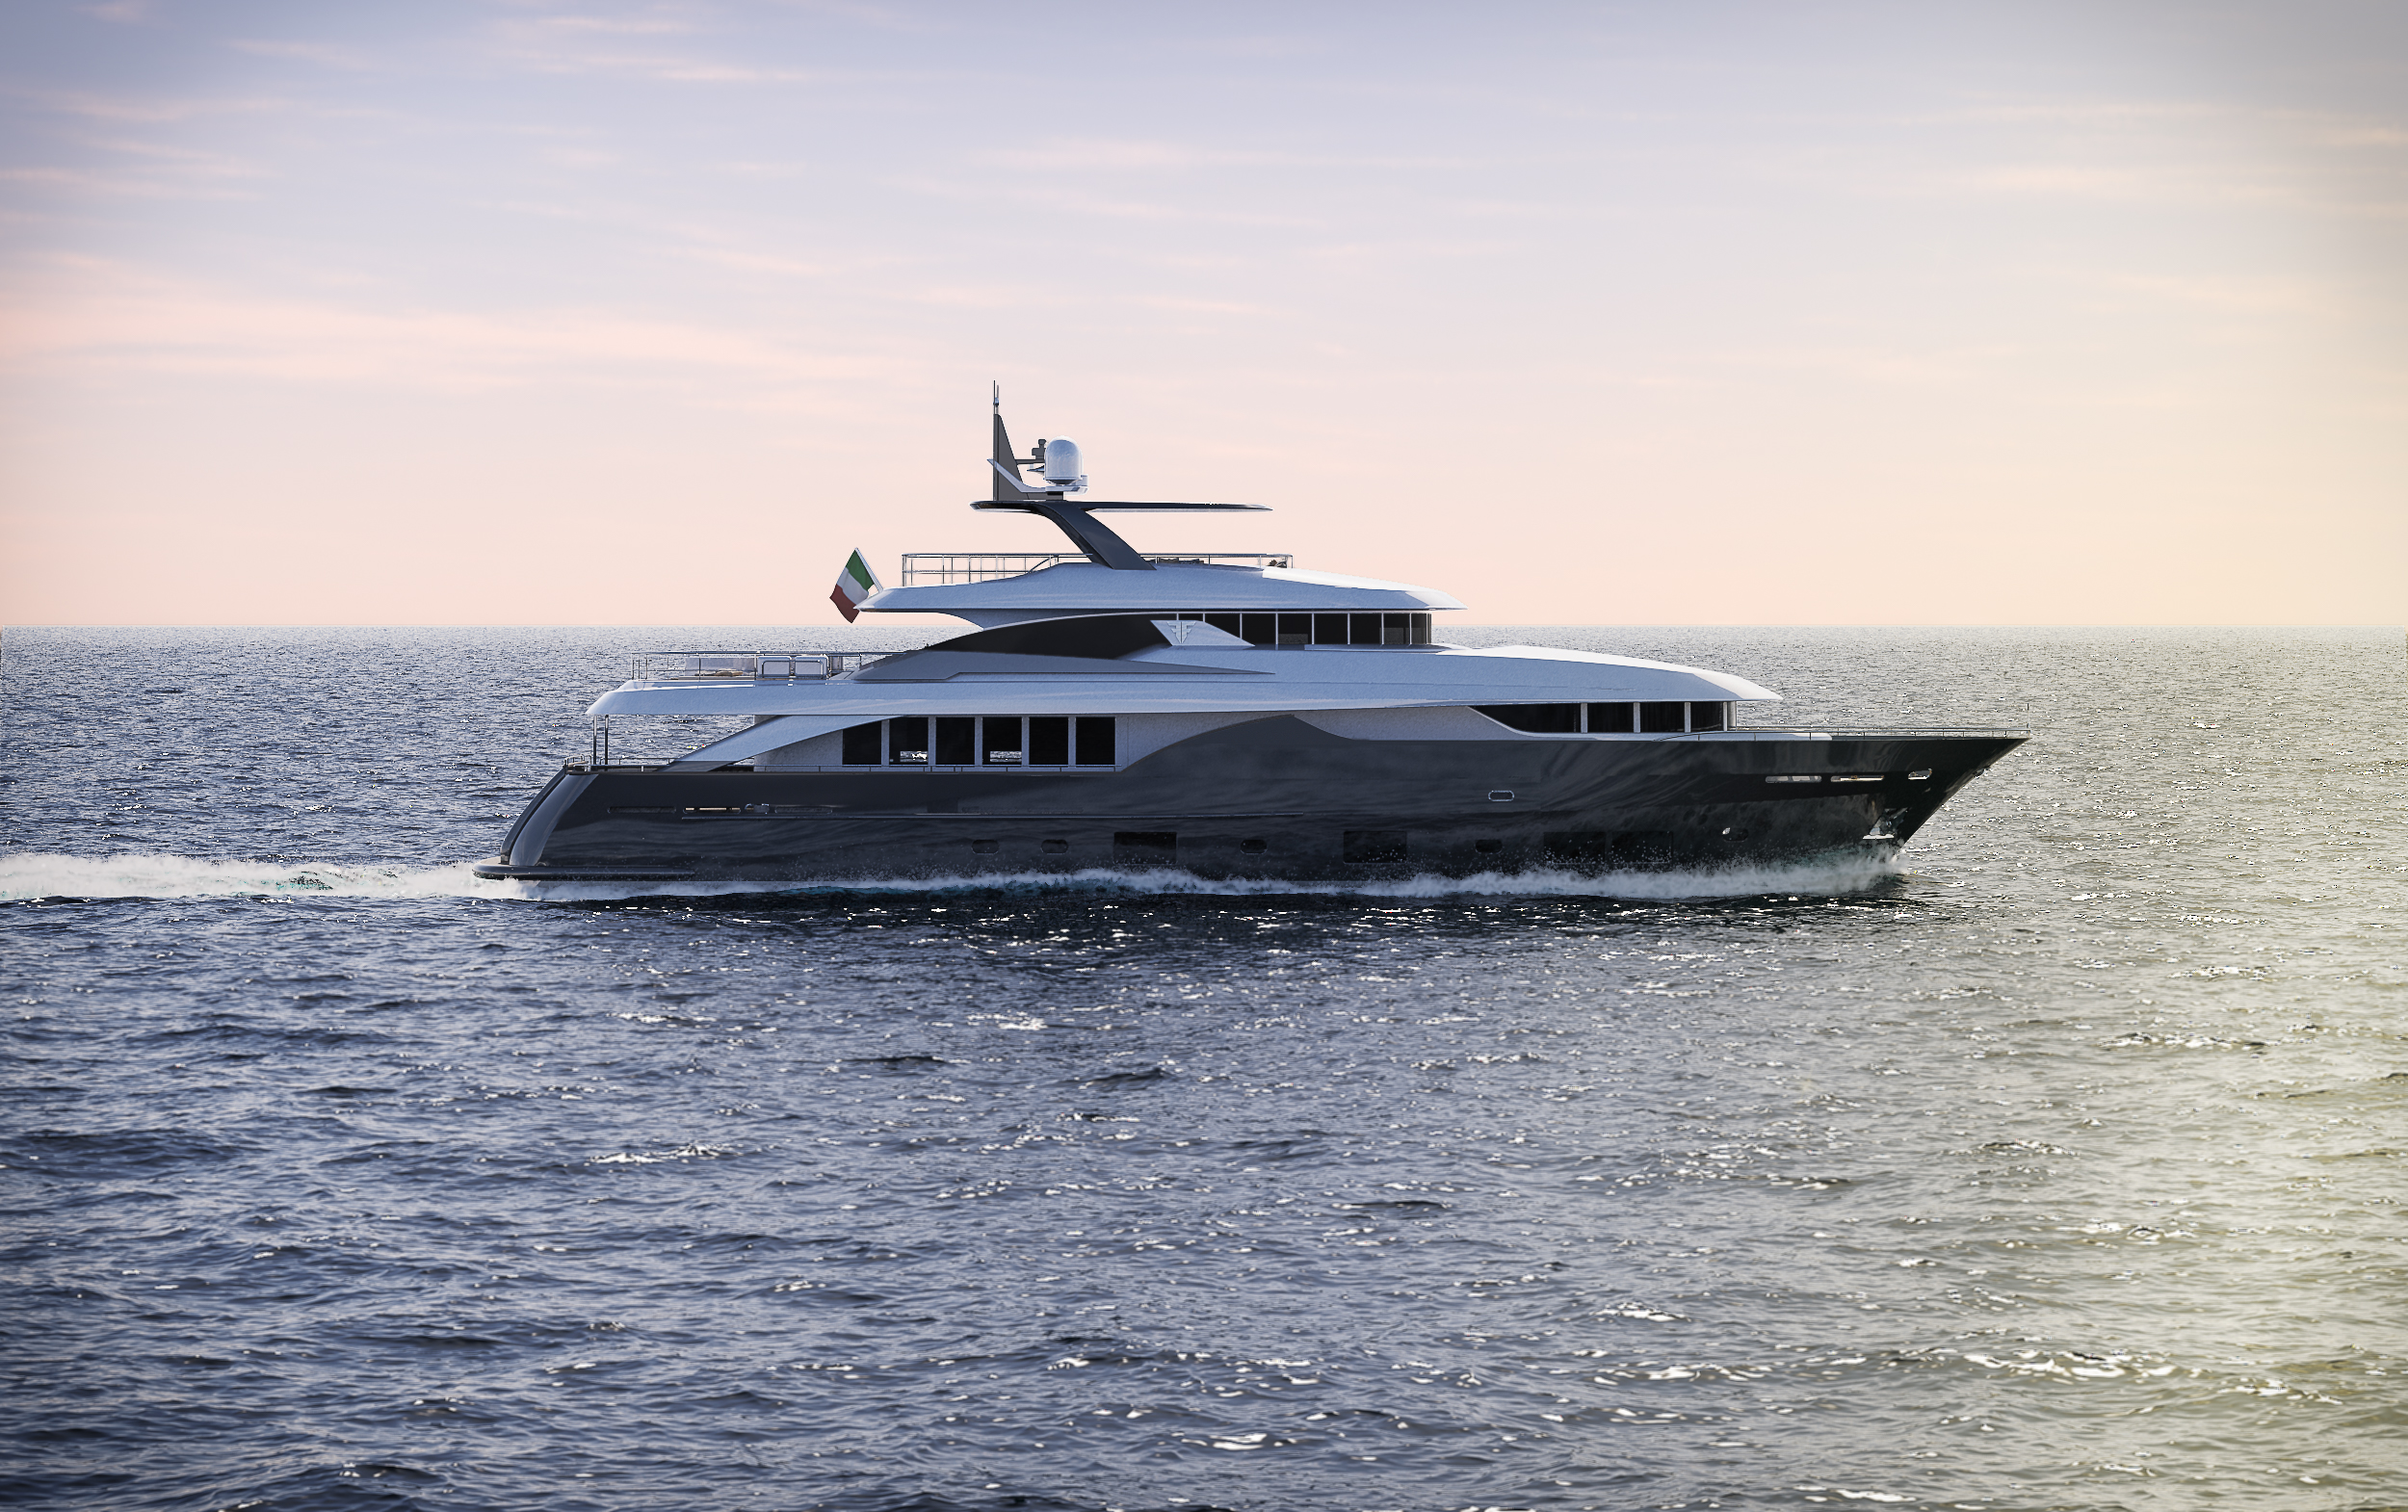 Filippetti Navetta 35M charter specs and number of guests